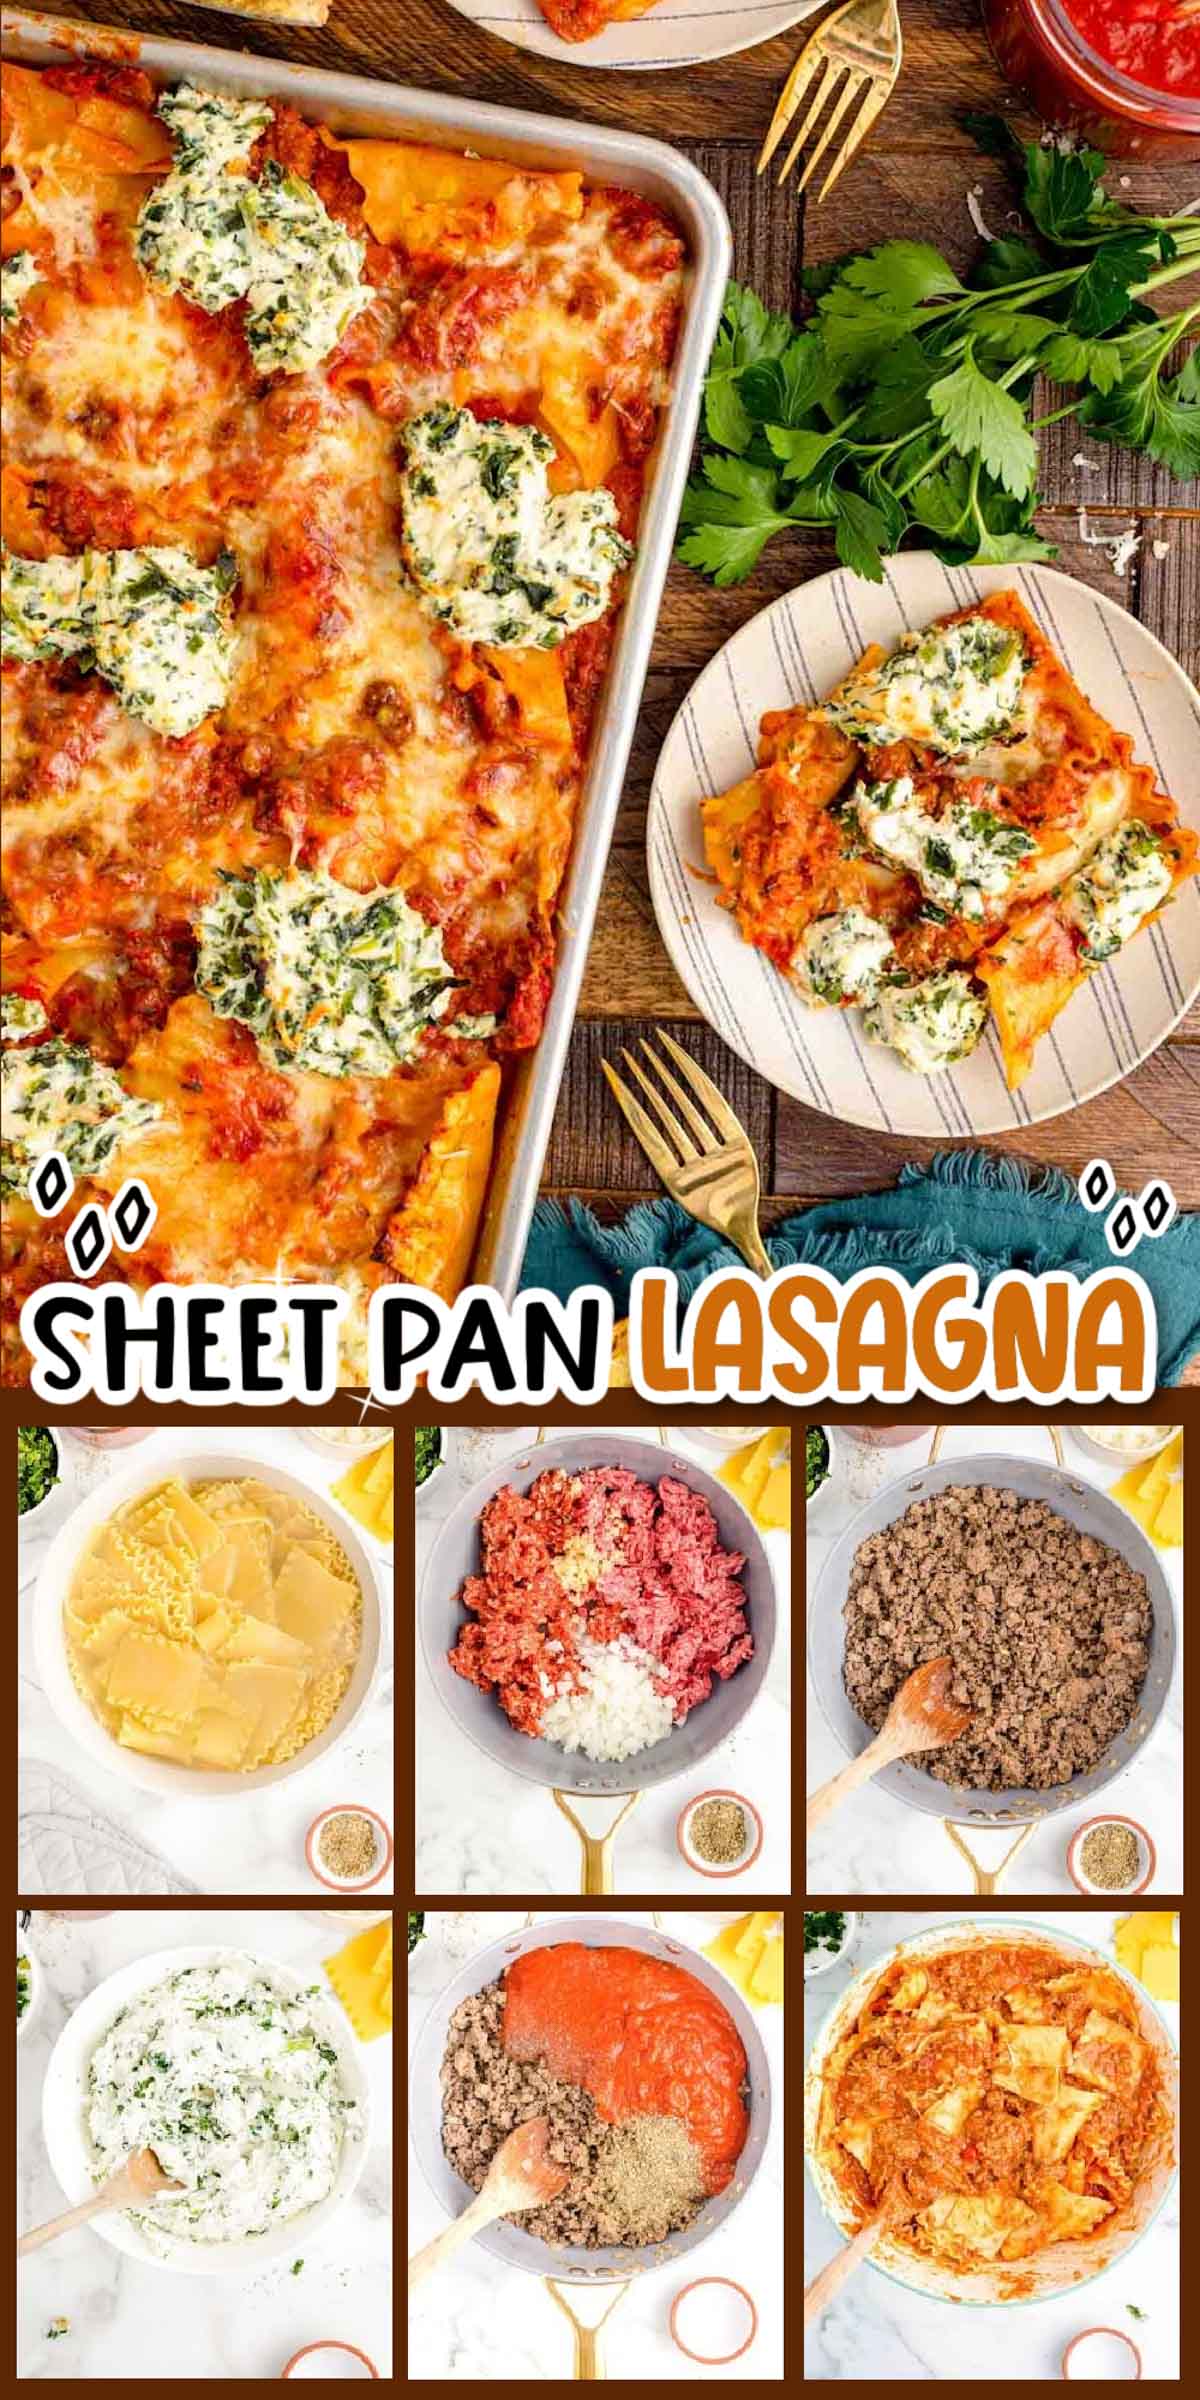 Giada's All-Crust Sheet Pan Lasagna is a simple yet delicious make-and-dump lasagna recipe that skips the tedious layering process! This sheet pan meal will feed a large crowd while easily pleasing their taste buds! via @sugarandsoulco